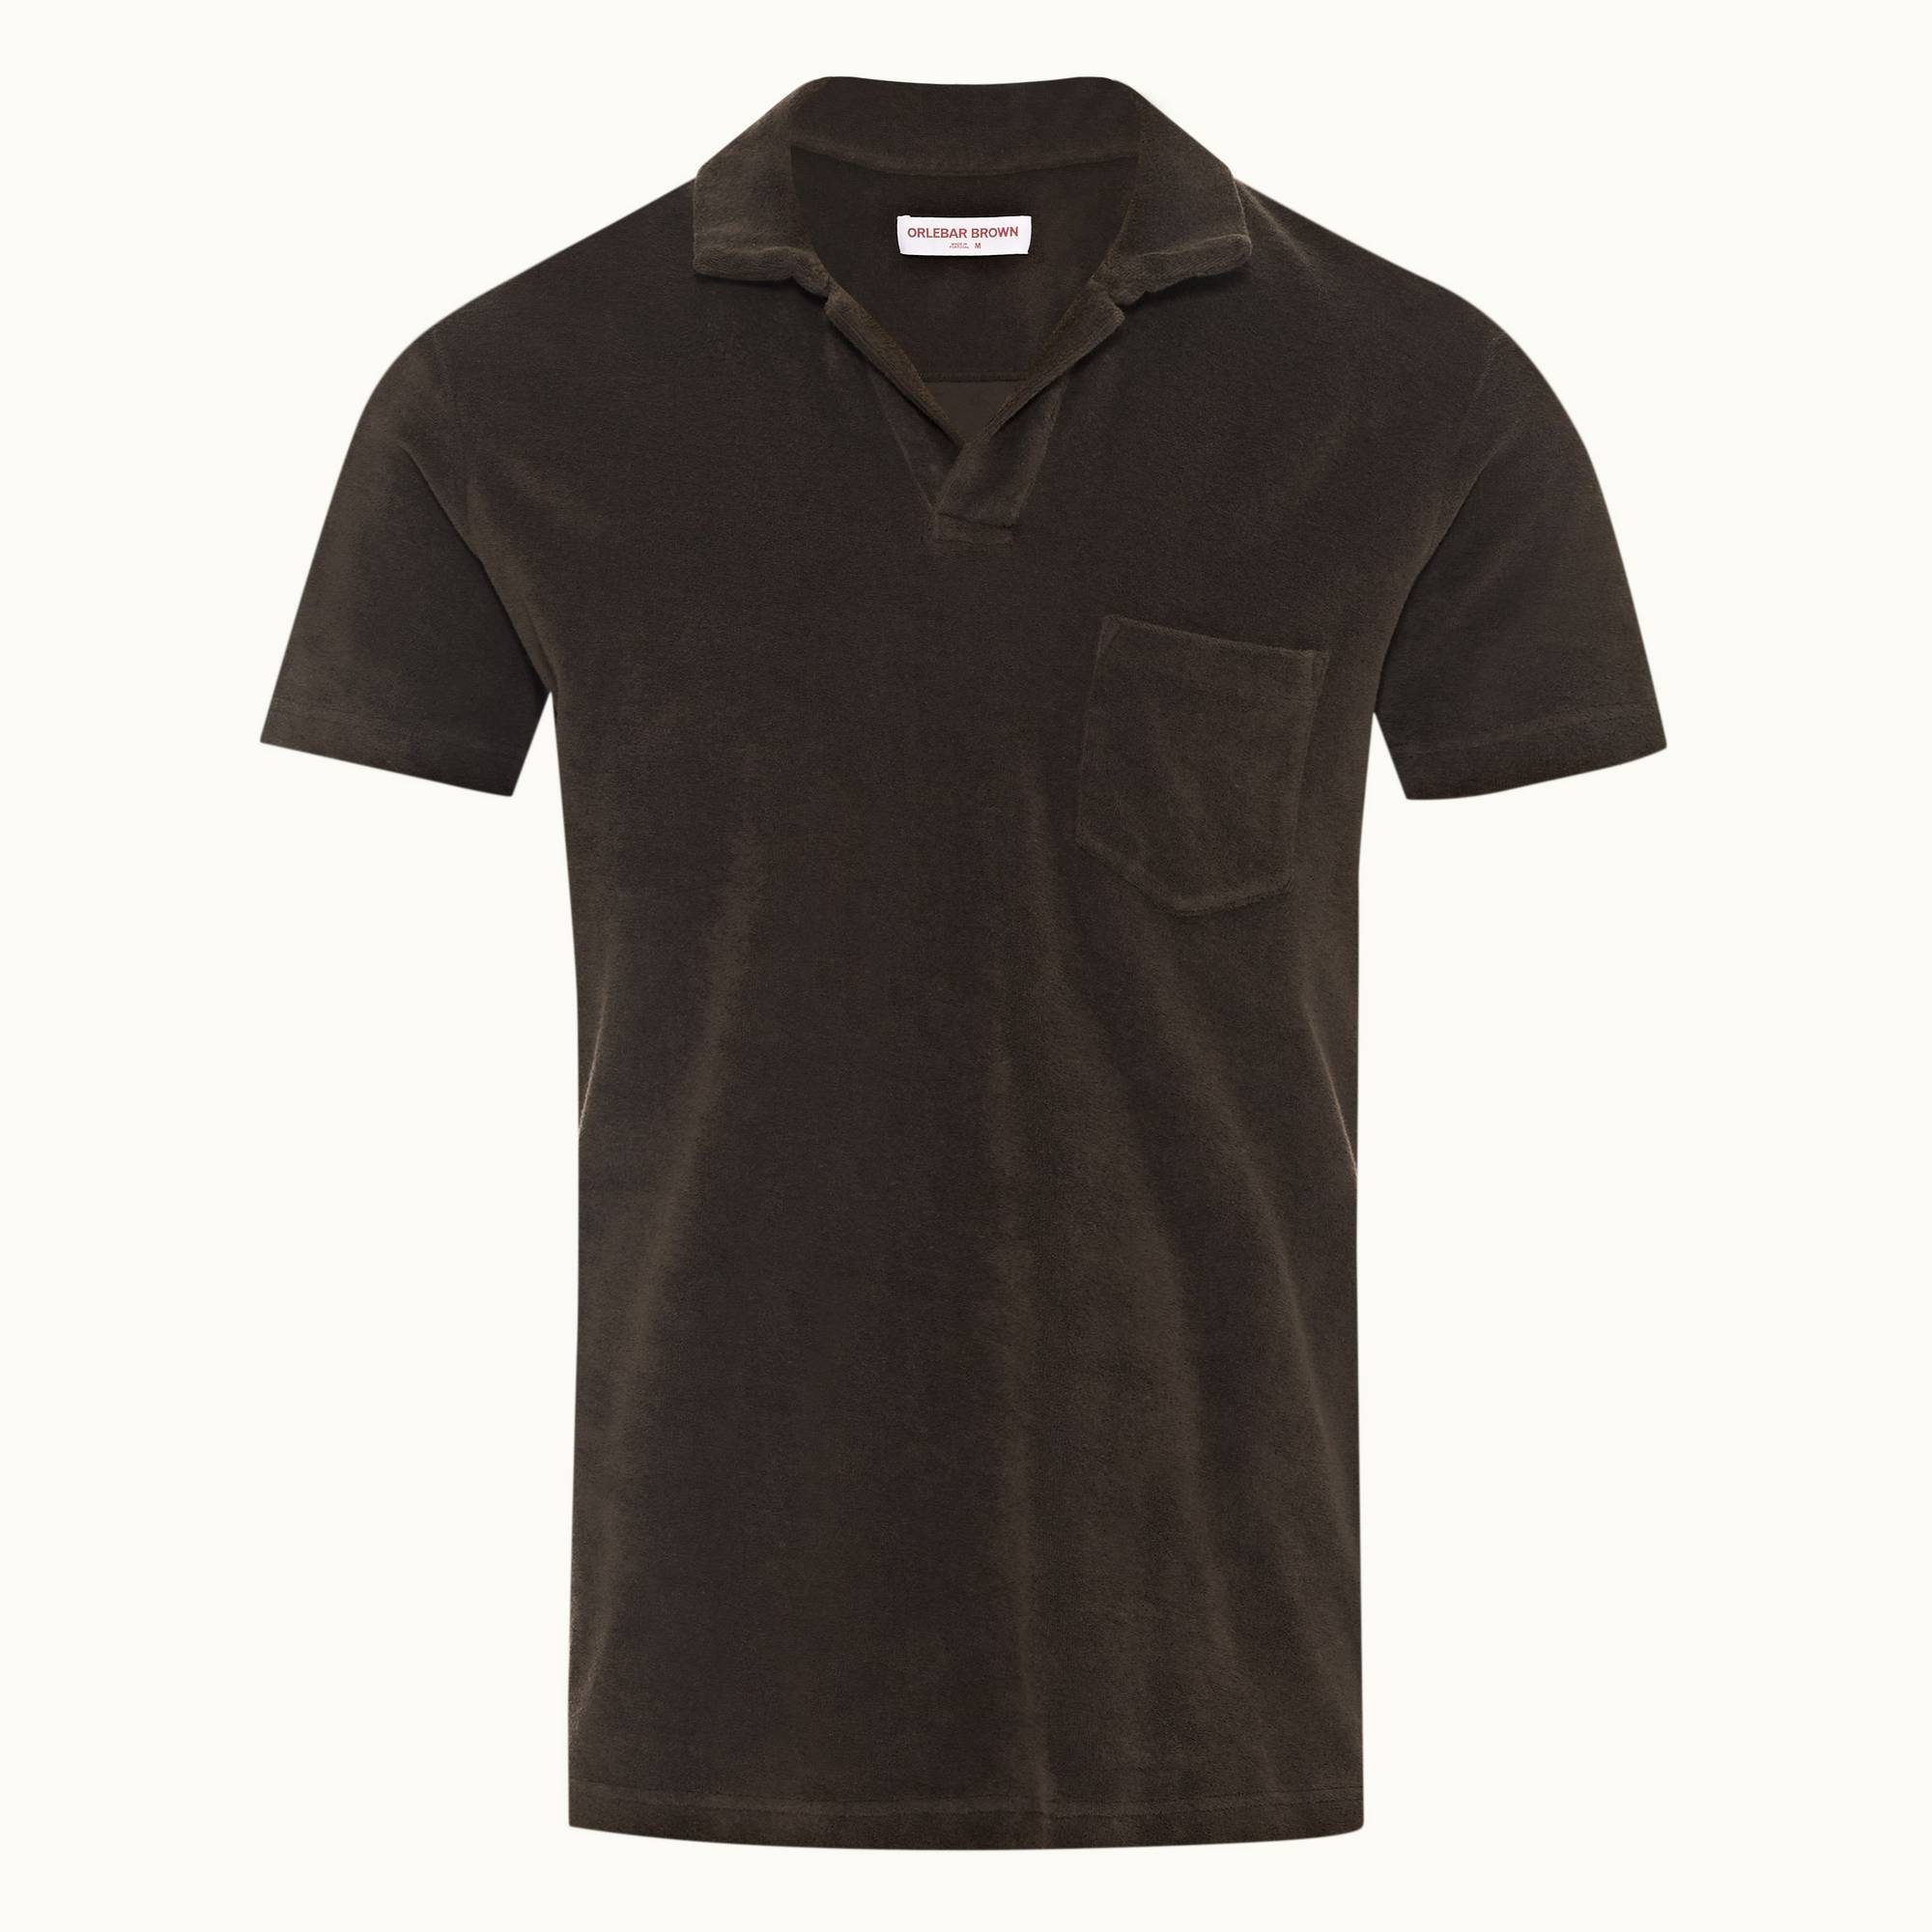 Terry Towelling - Mens Truffle Tailored Fit Resort Towelling Polo Shirt